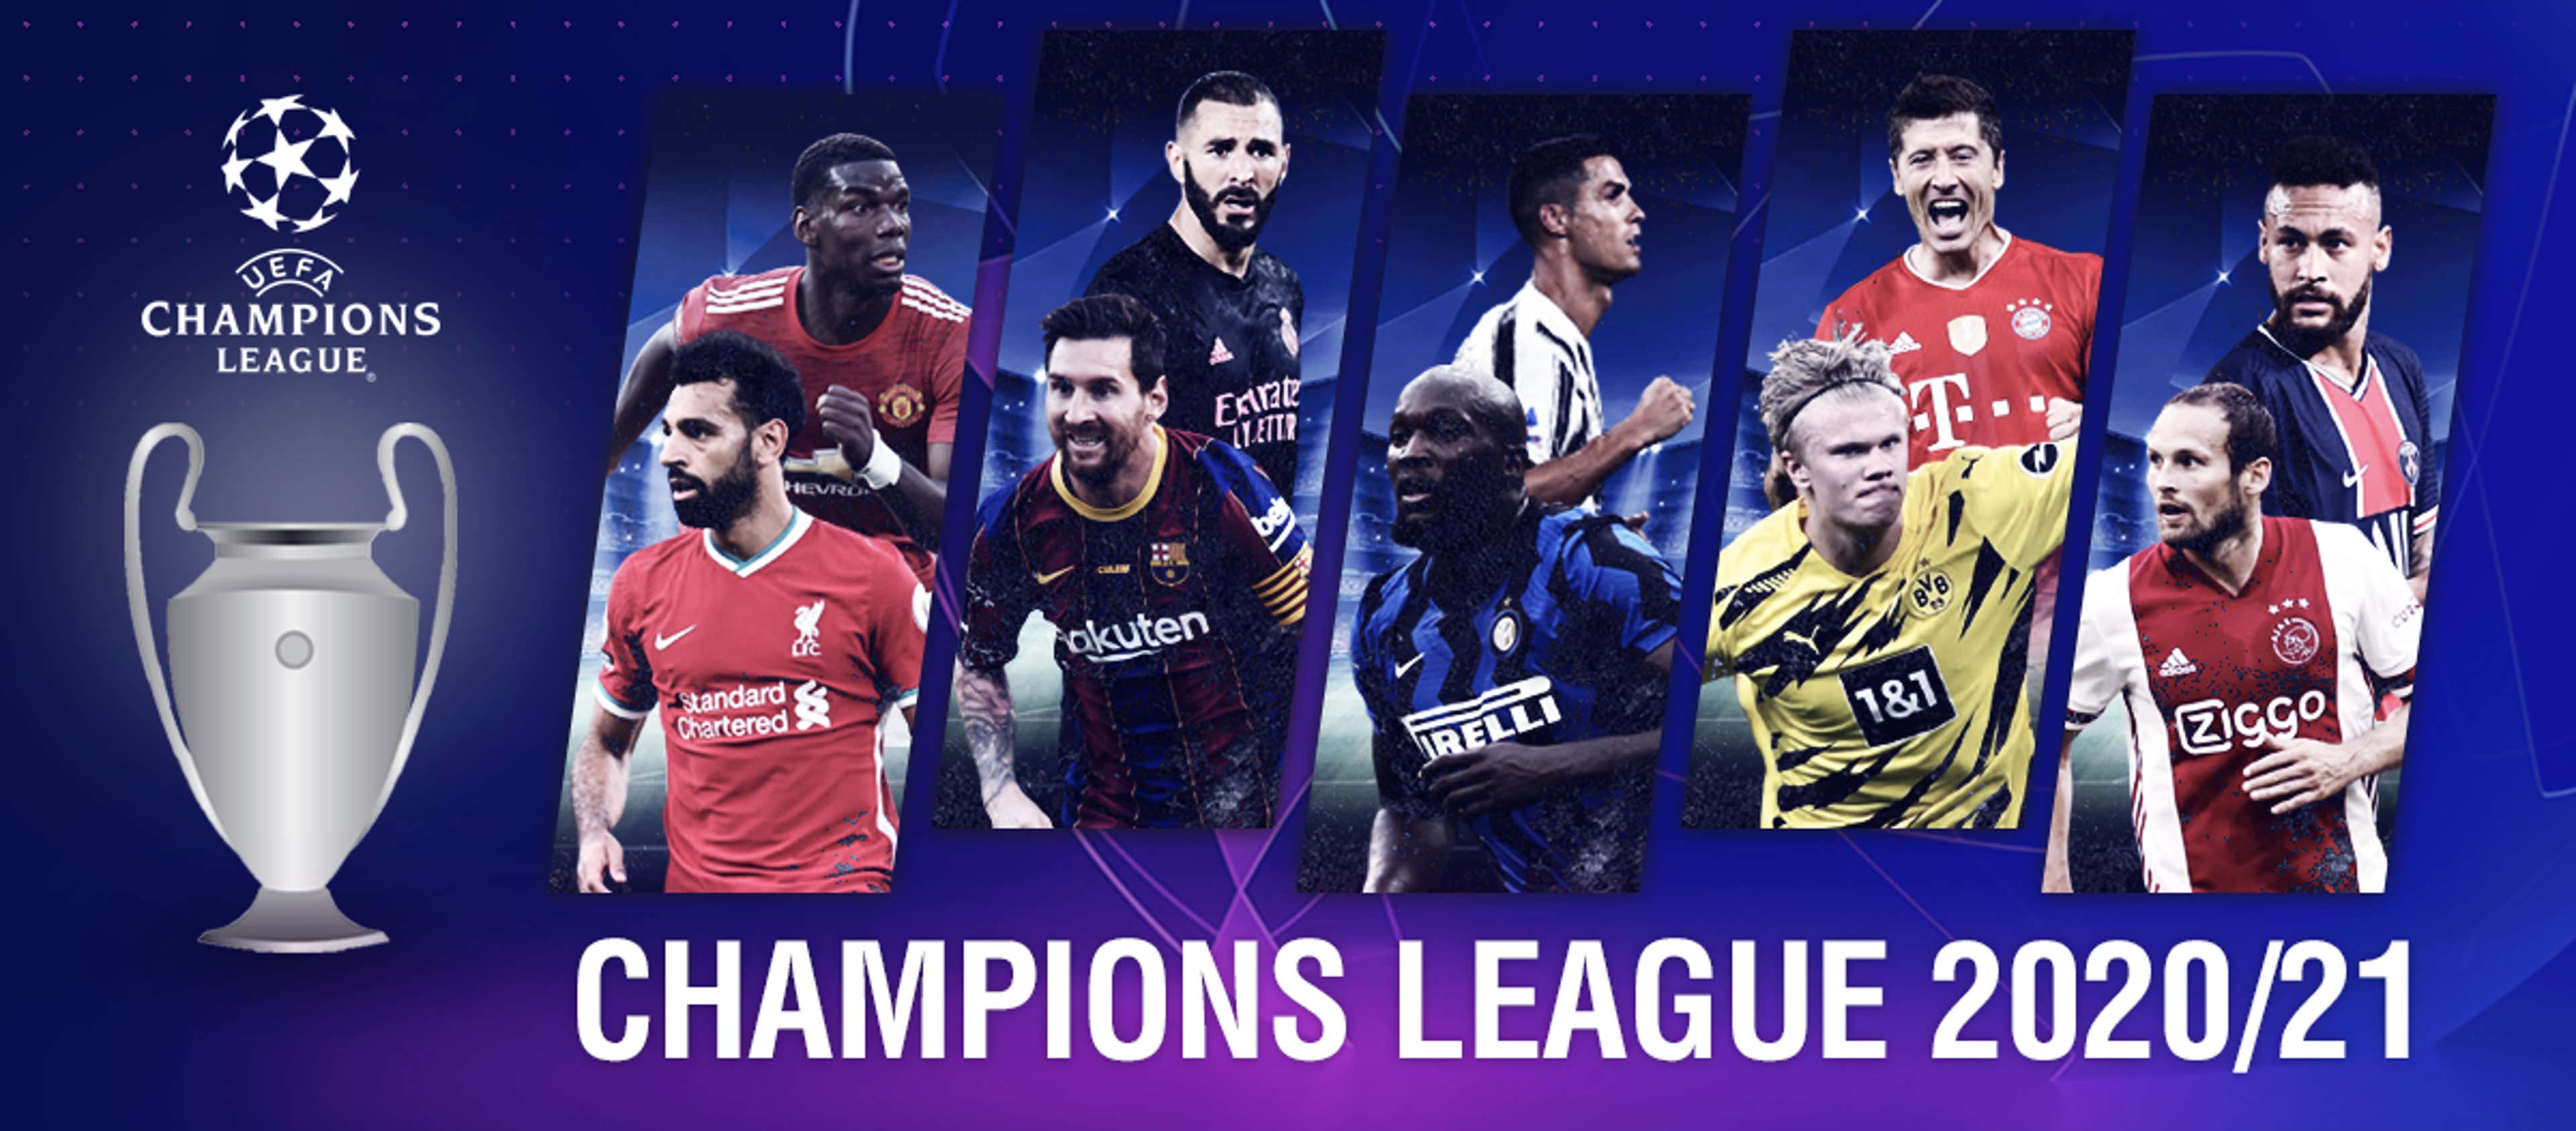 Champions League Footer 2020-21